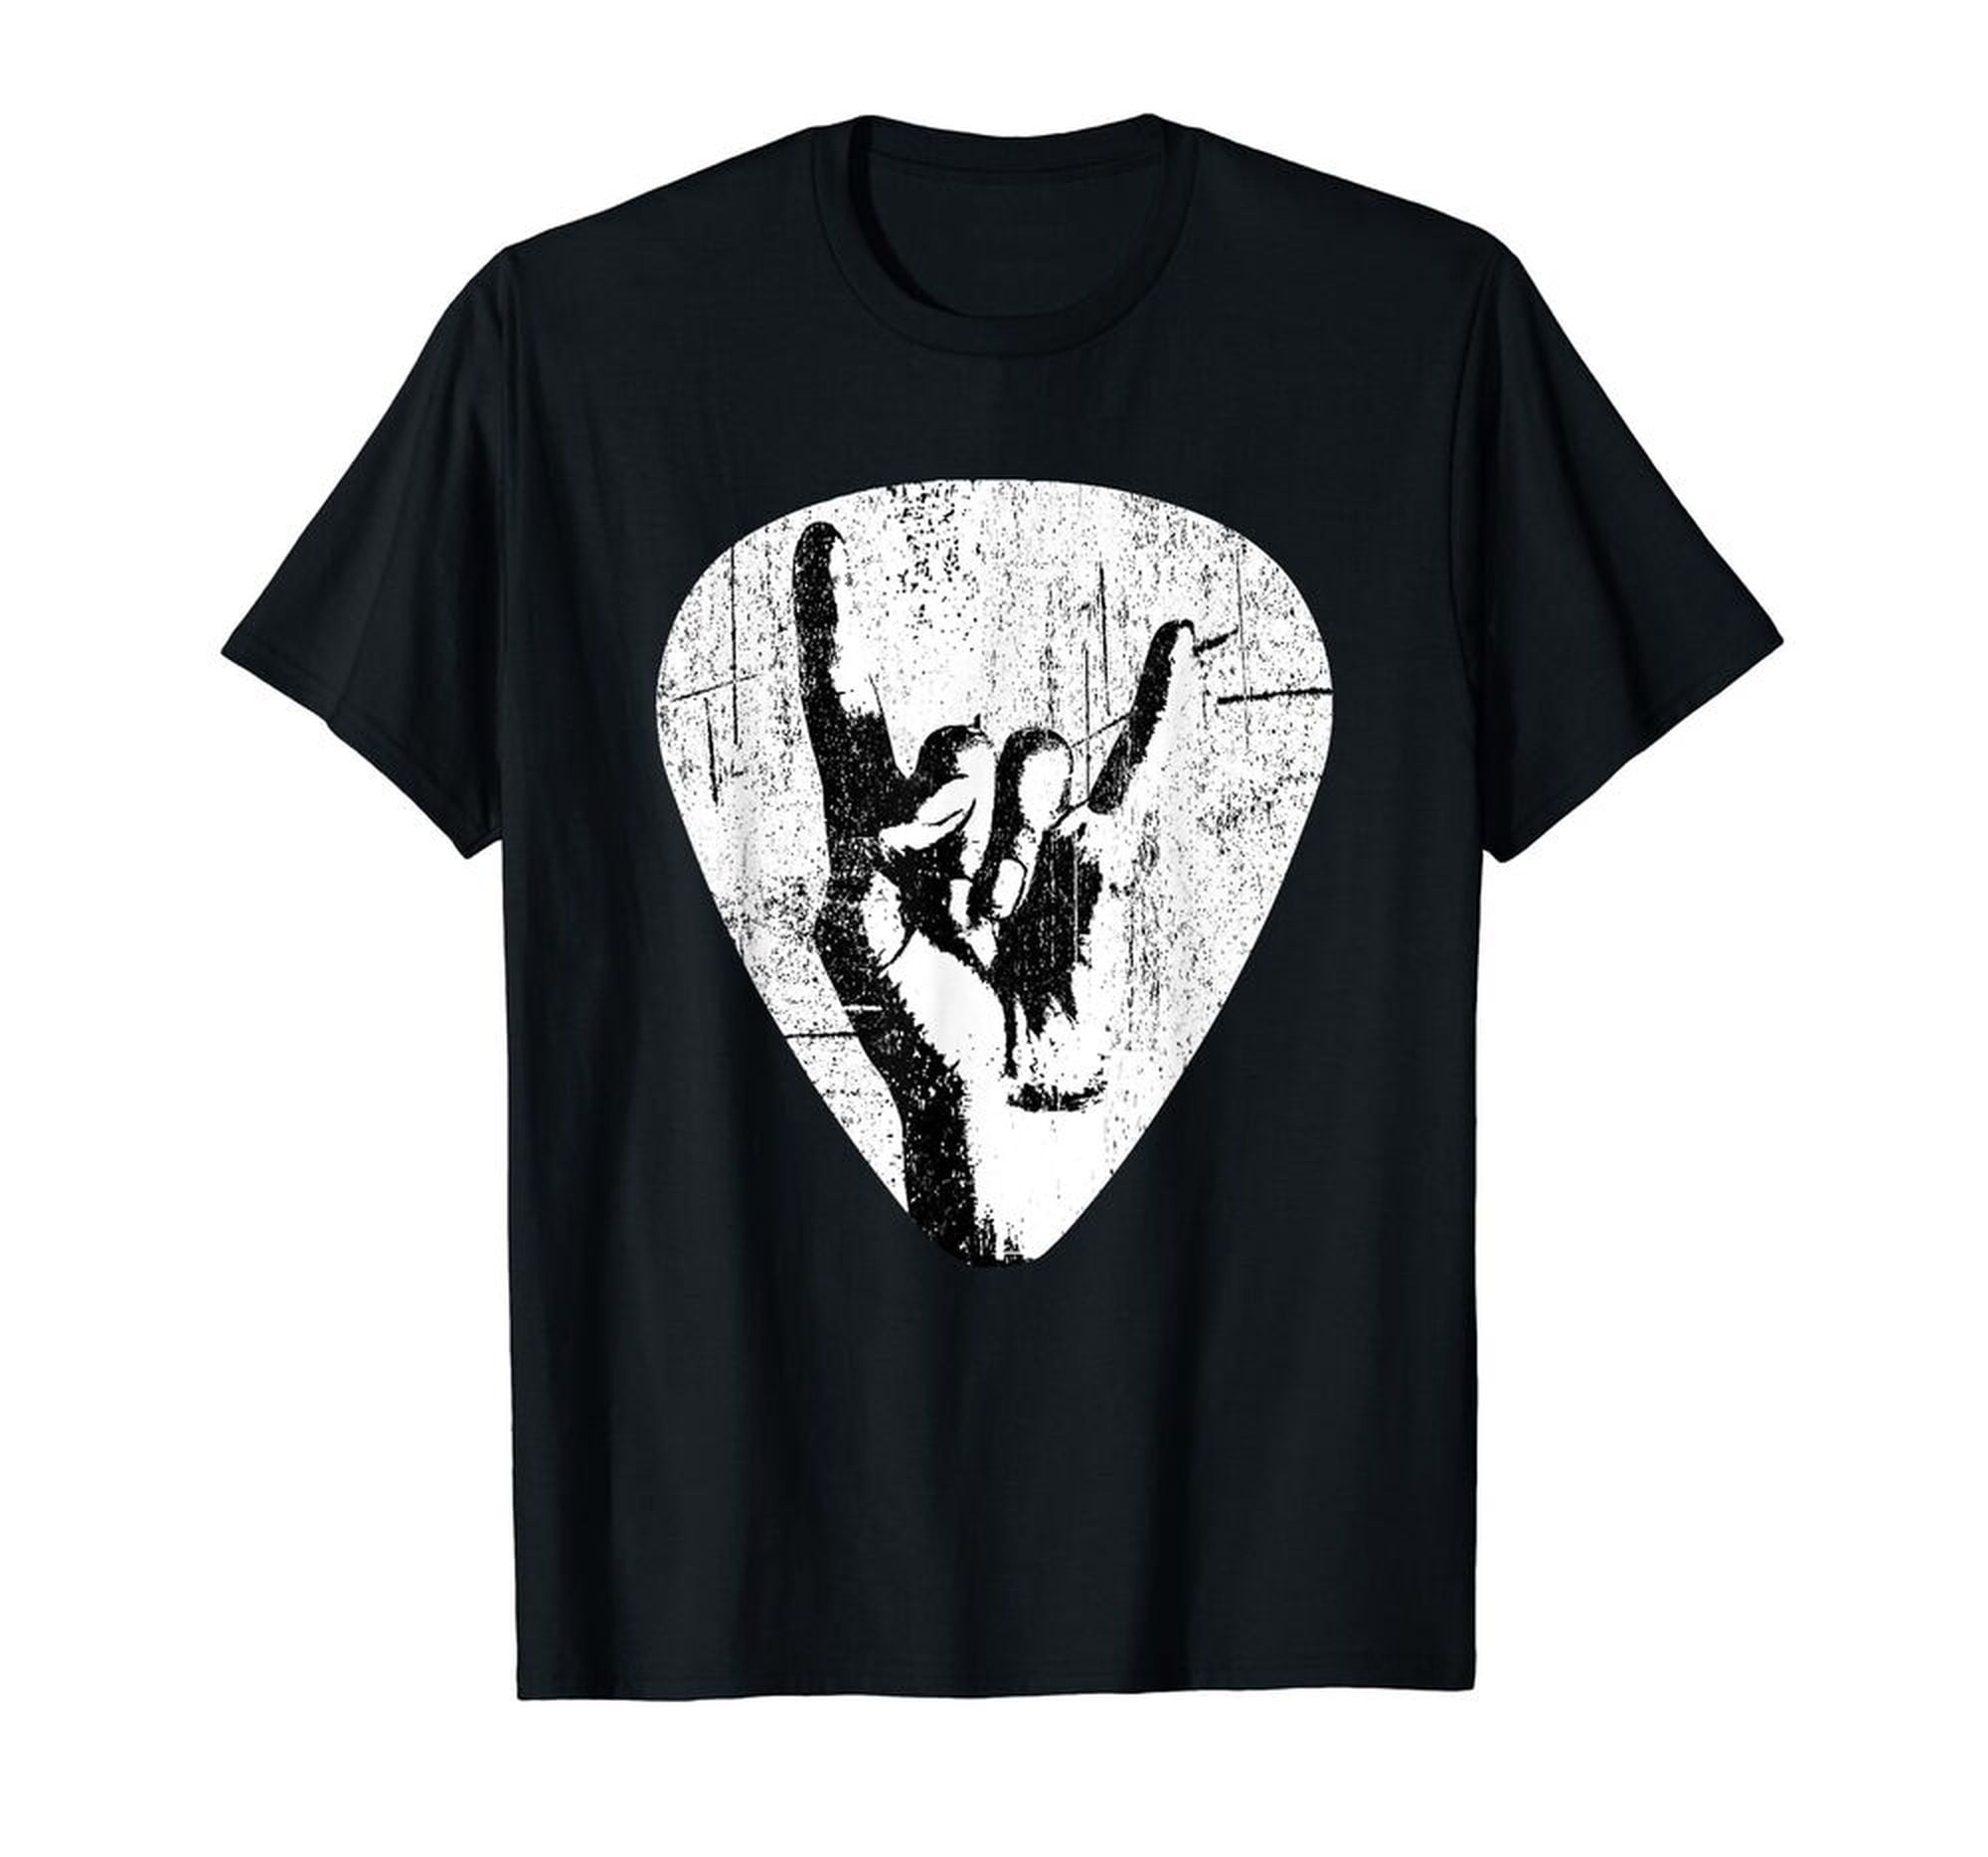 Rebel Rock Threads: Iconic Hand Gestures and Instrument Graphics for a ...